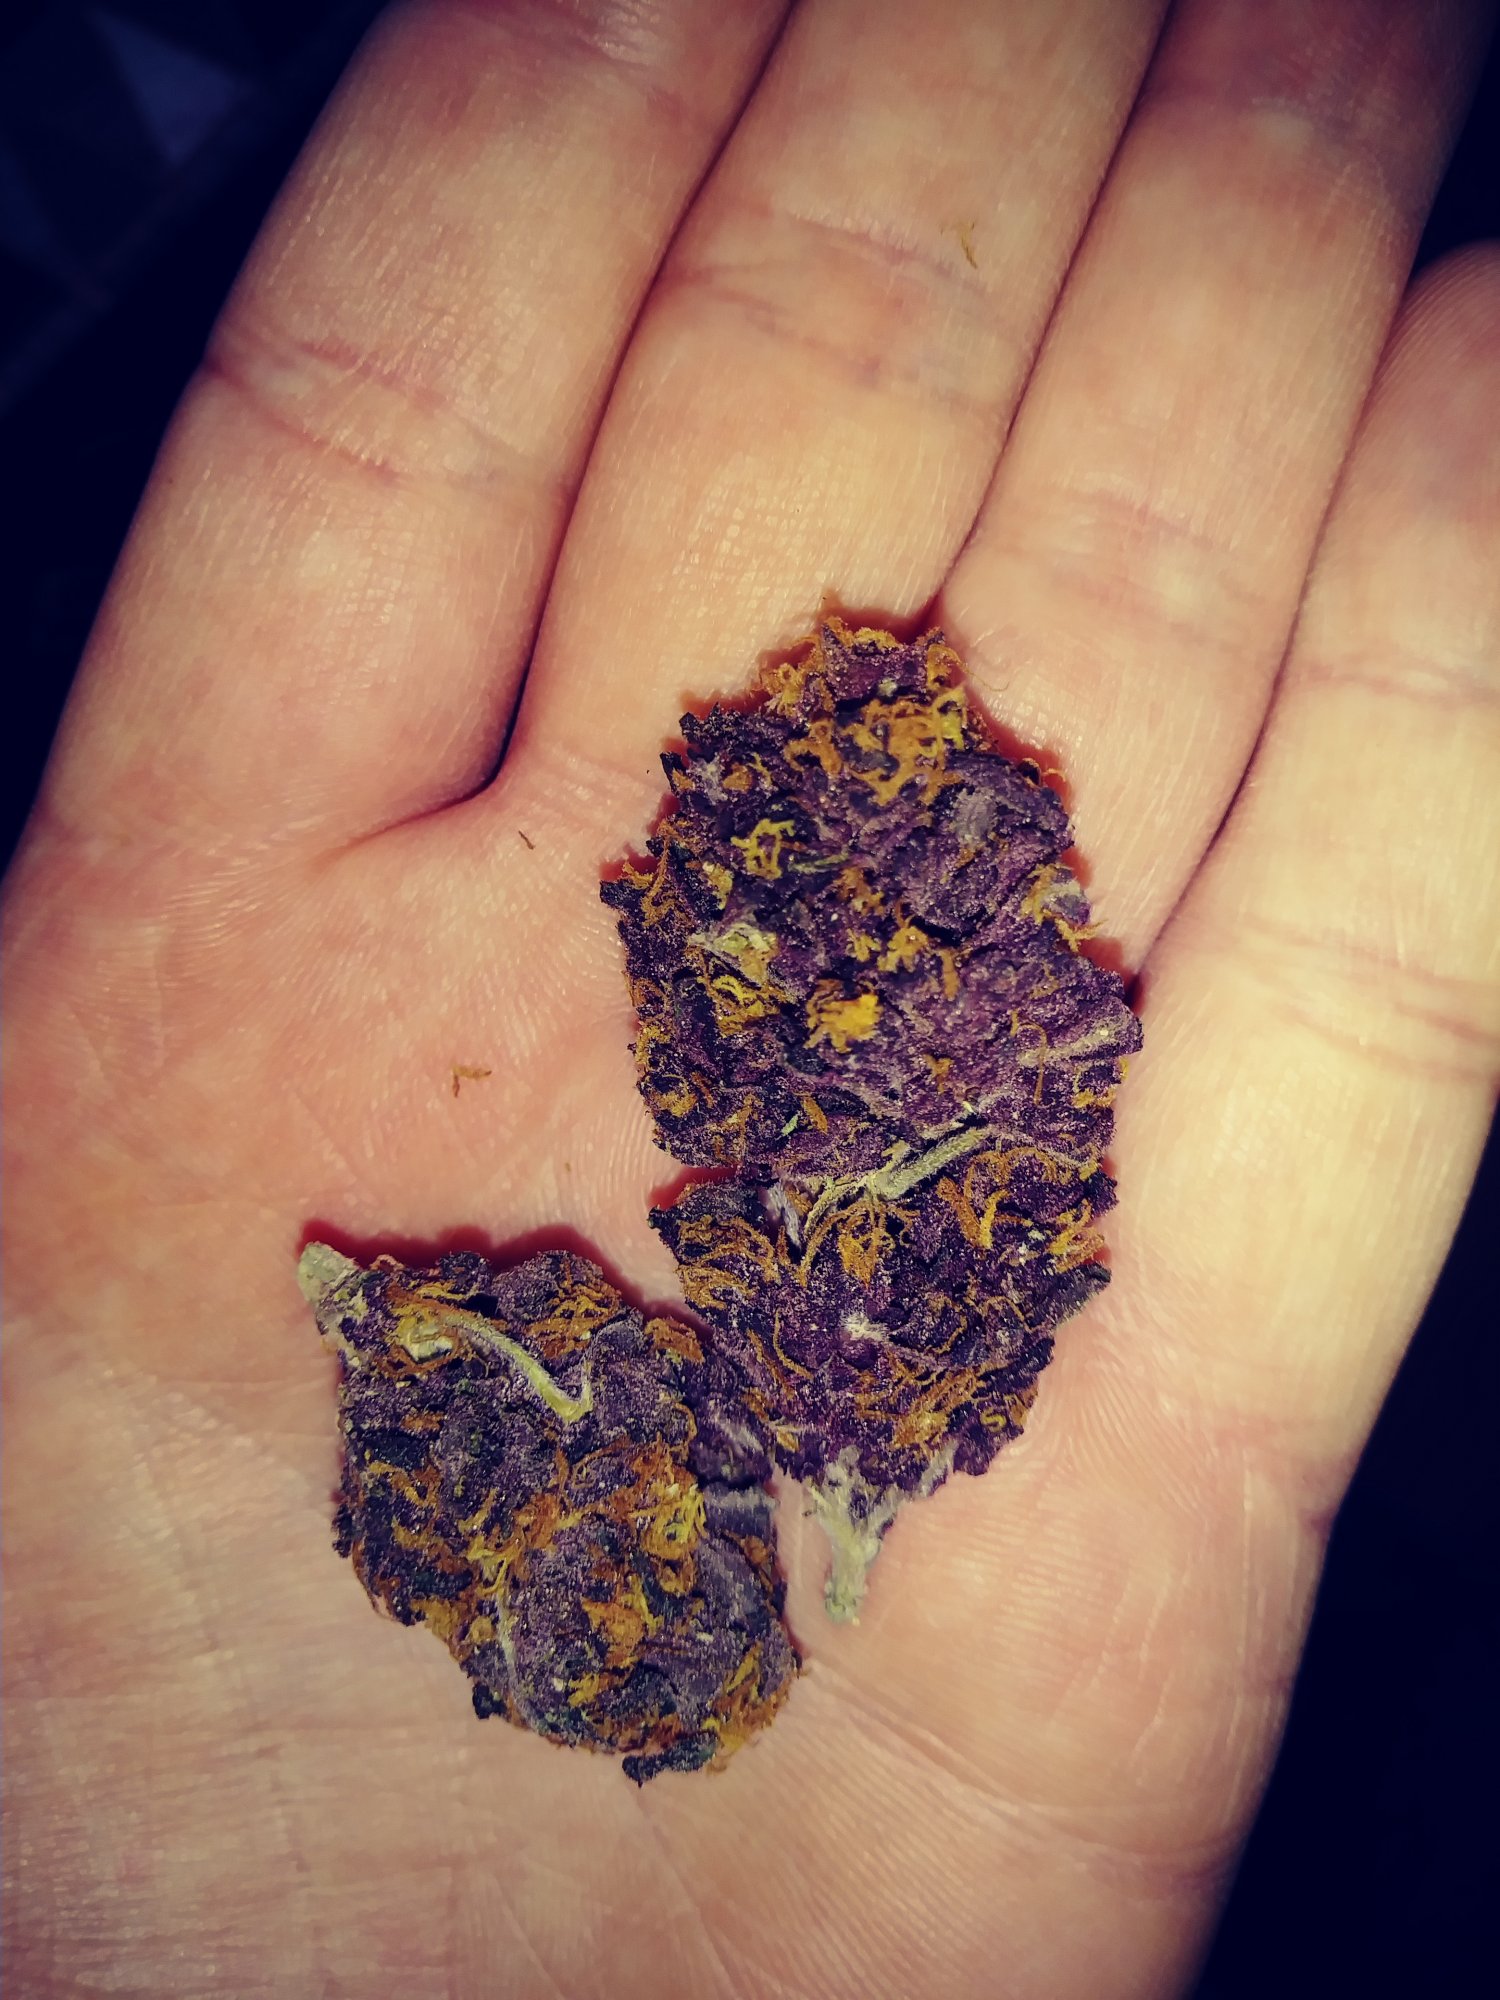 Most purp i have seen